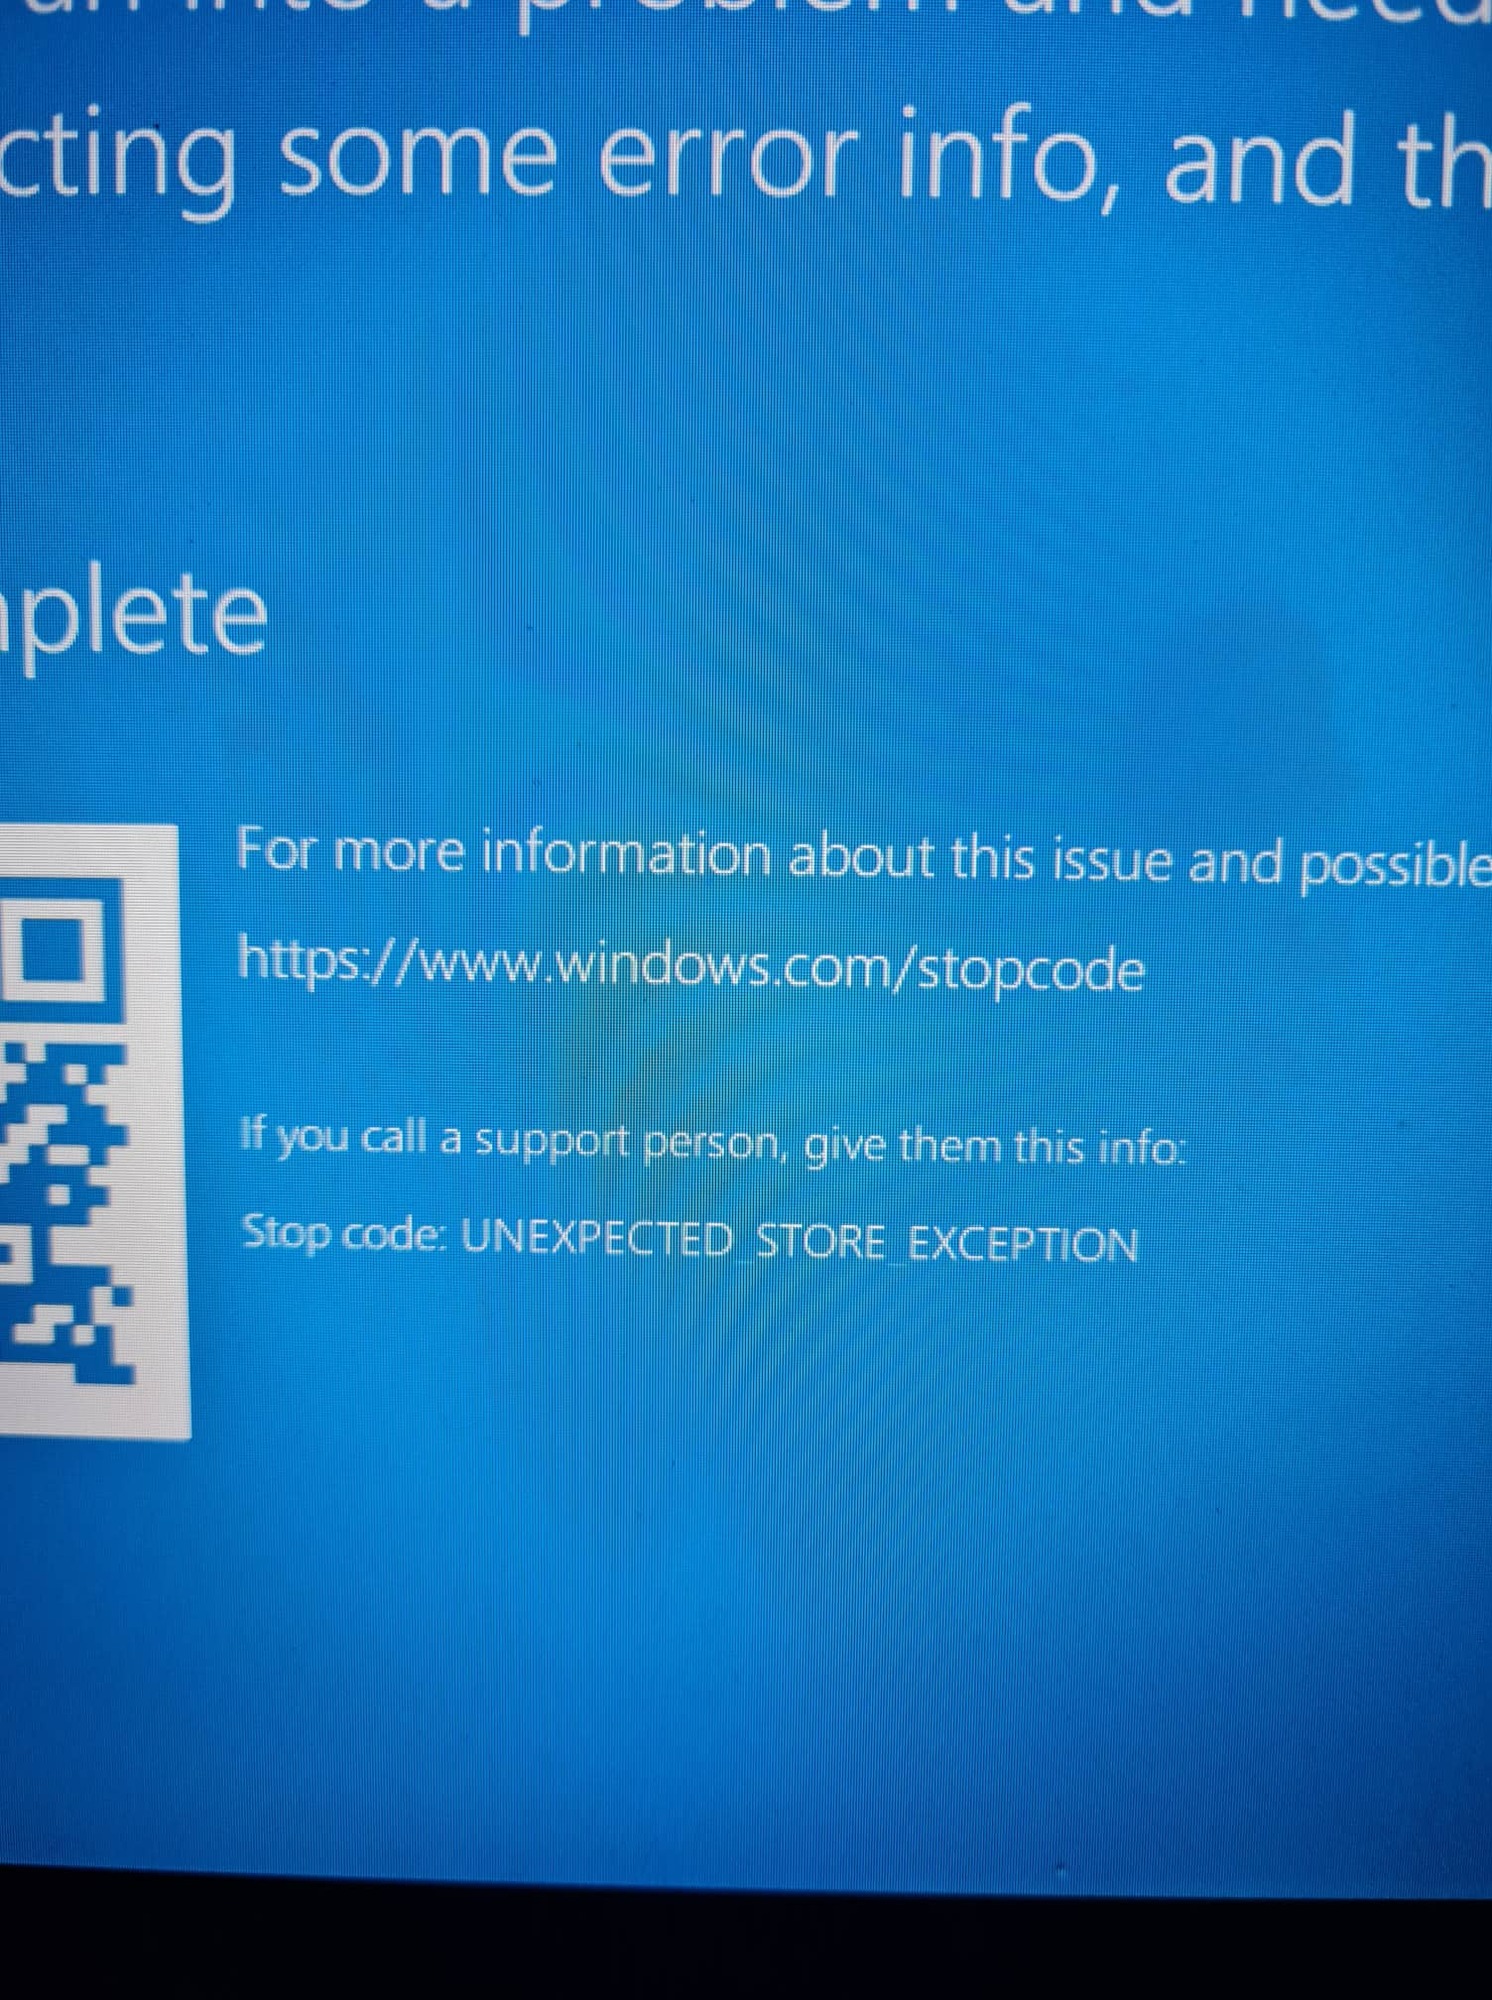 UNEXPECTED_STORE_EXCEPTION AND KERNEL_DATA_INPAGE_ERROR Blue Screens 5a5175d6-95fc-4229-908a-b50998f3395a?upload=true.jpg